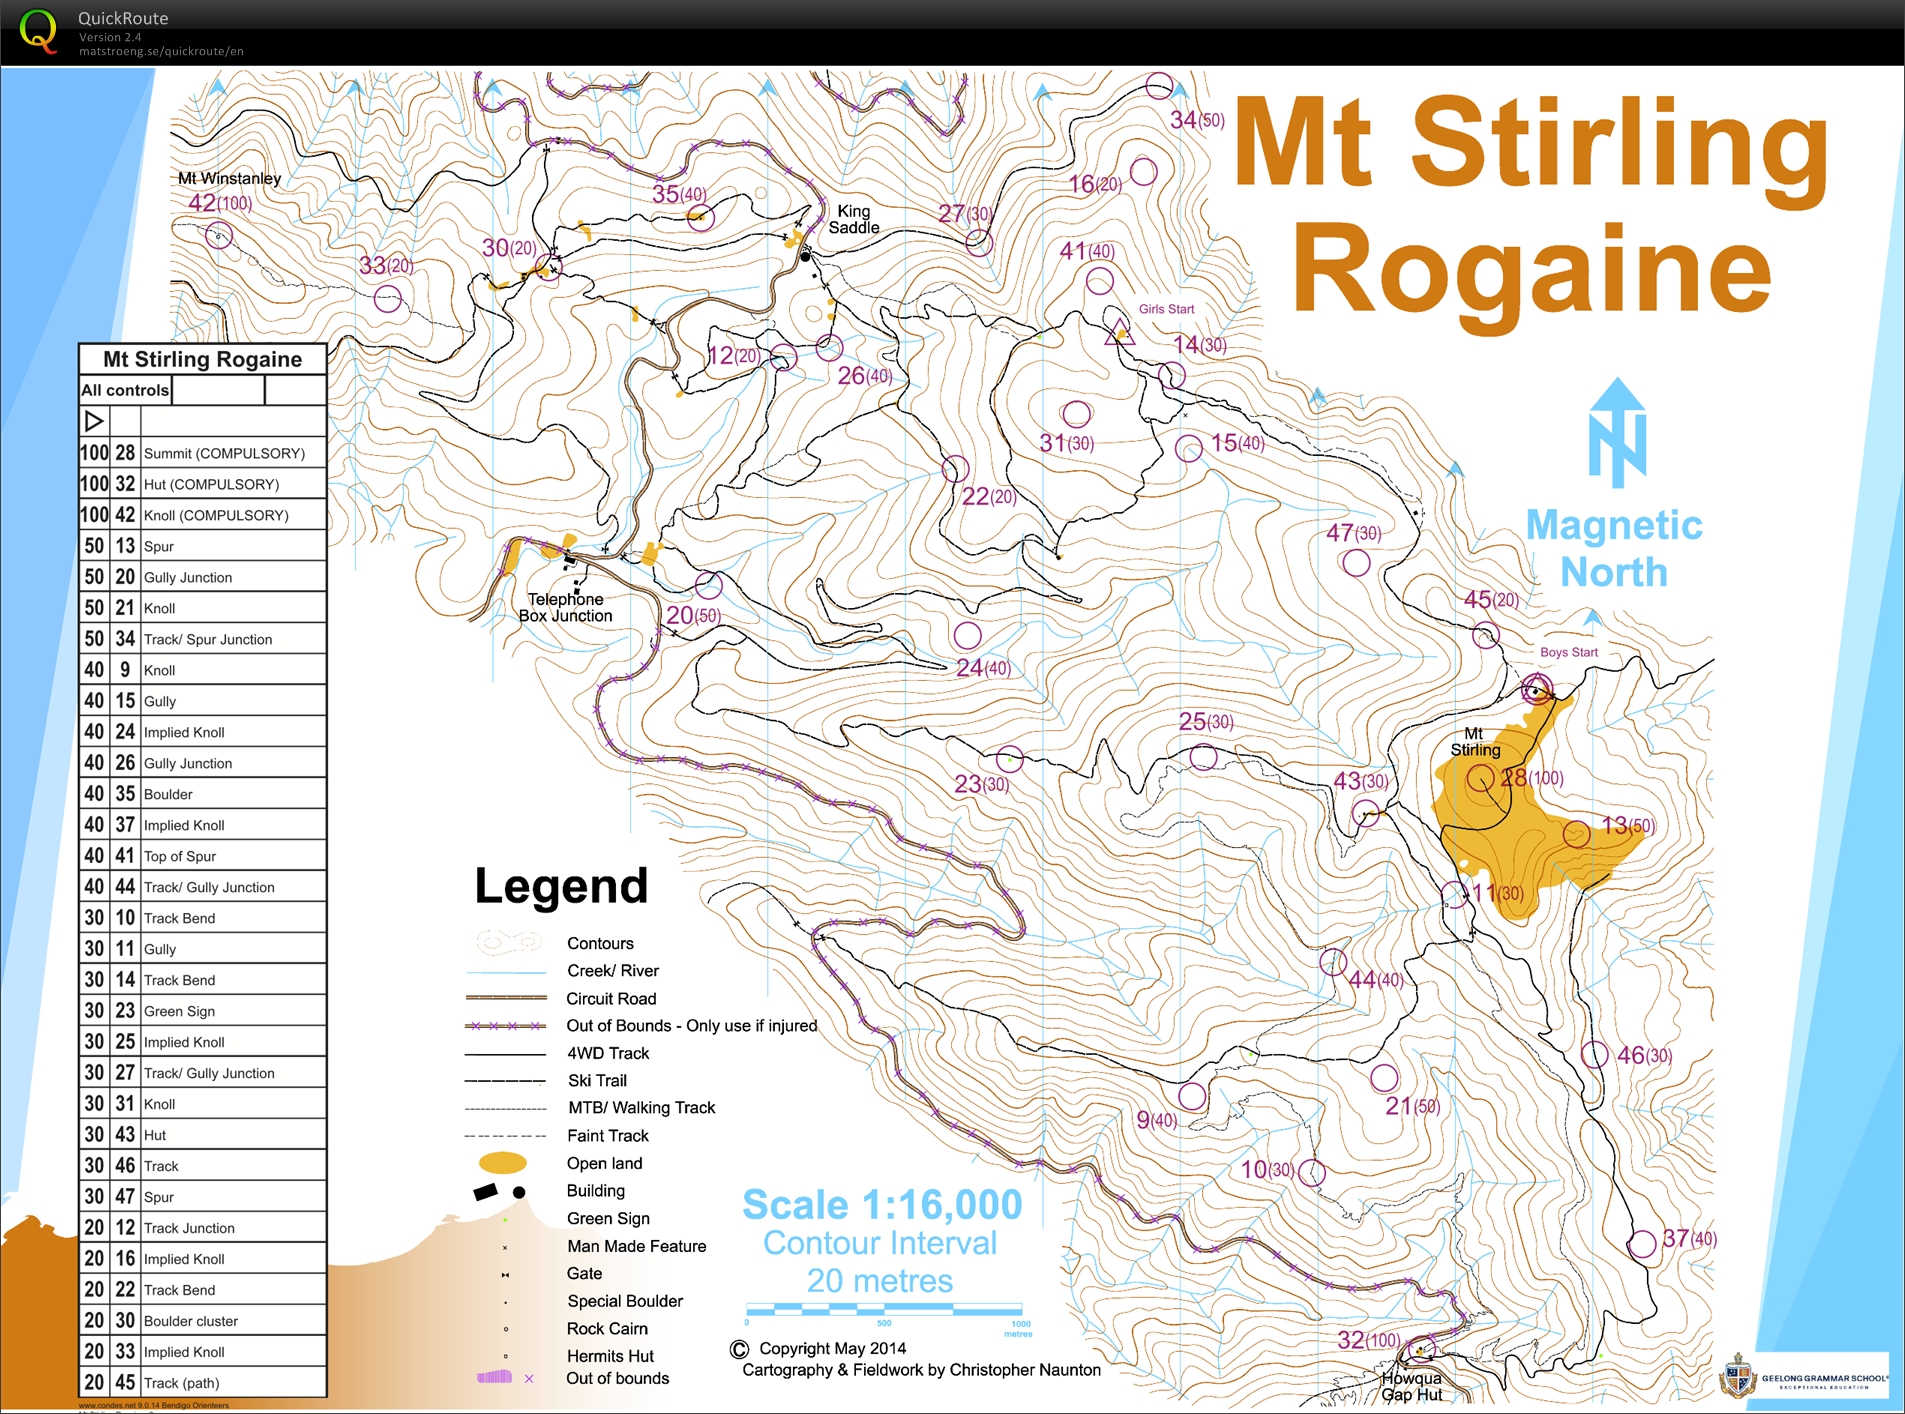 Mt Stirling Rogaine - Ross and Kat's run (05/11/2014)